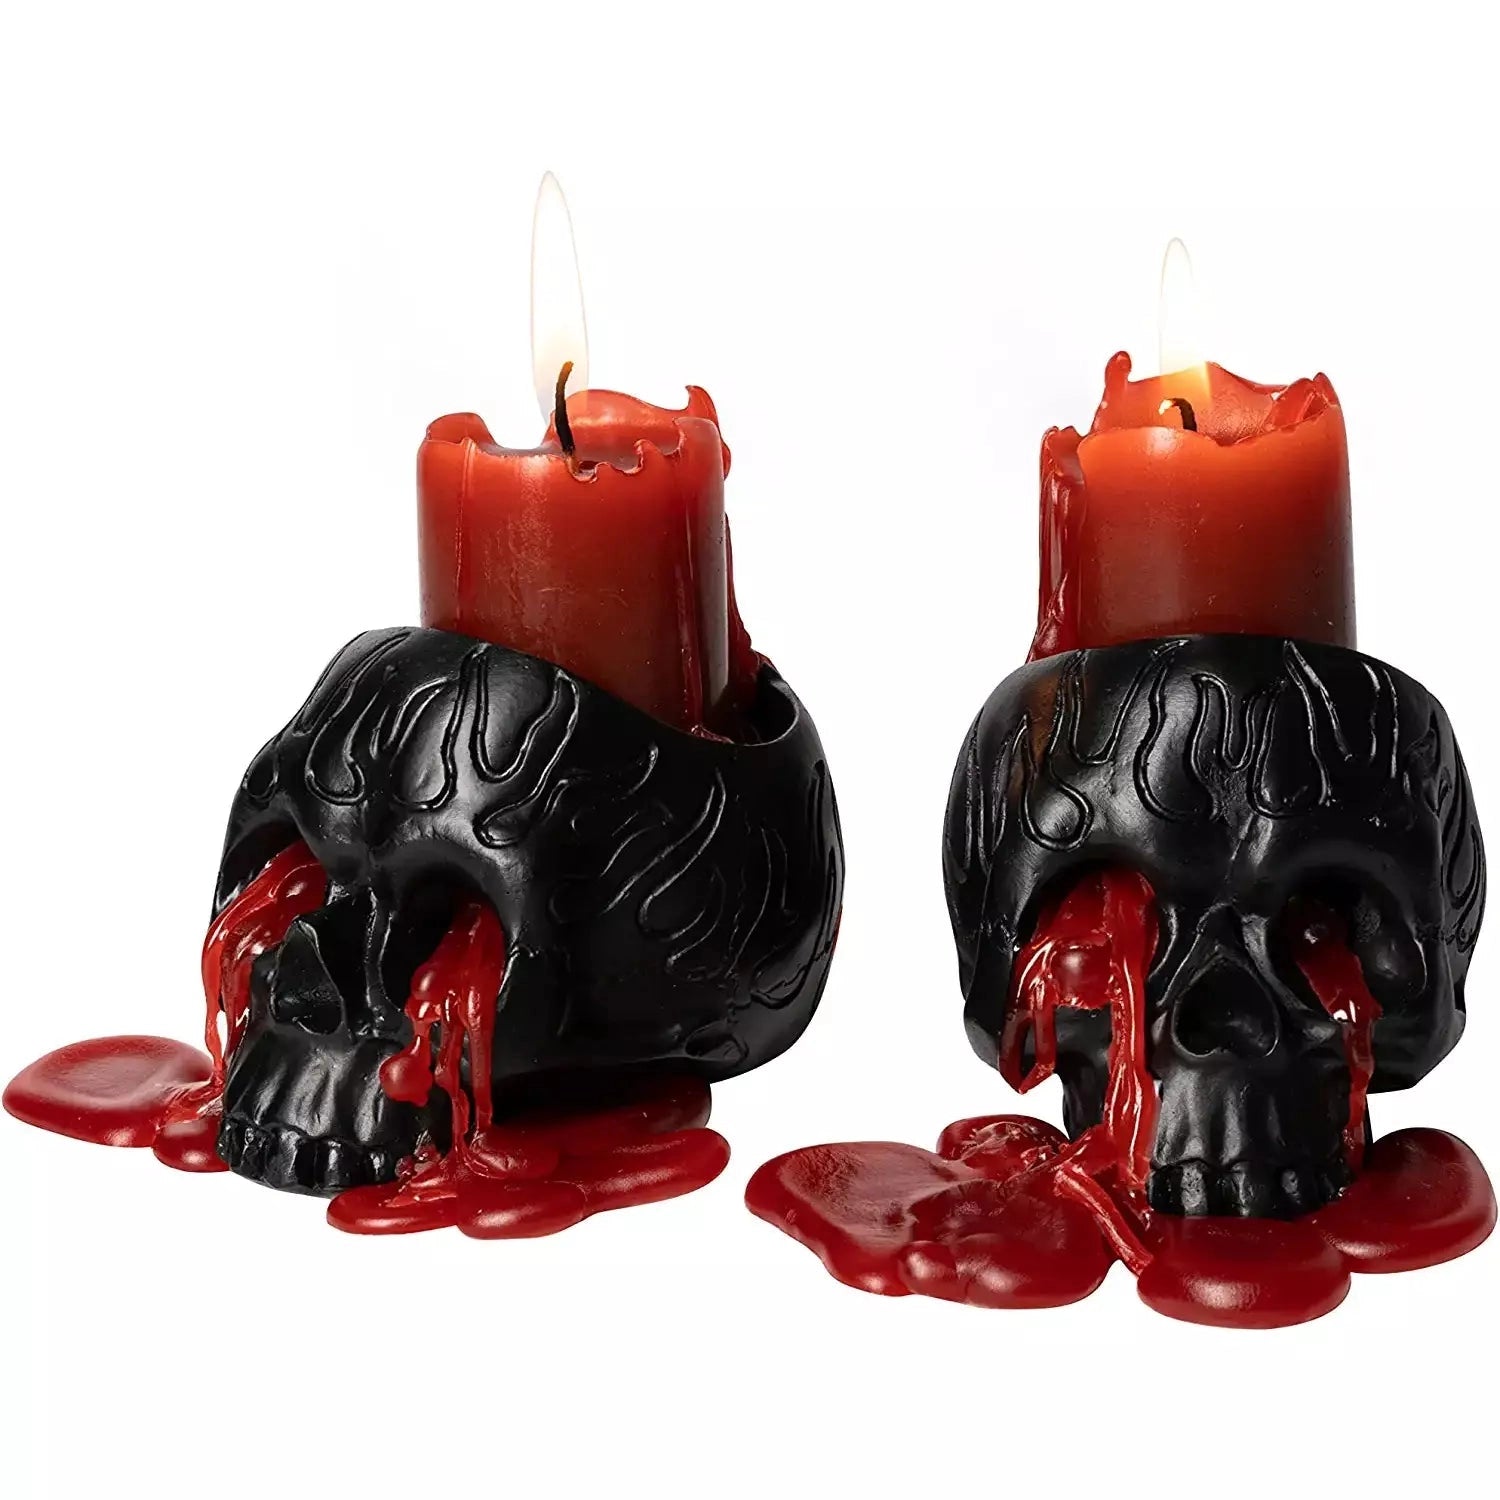 Bleeding Skull Candle Holder with Candles - 2 Pack